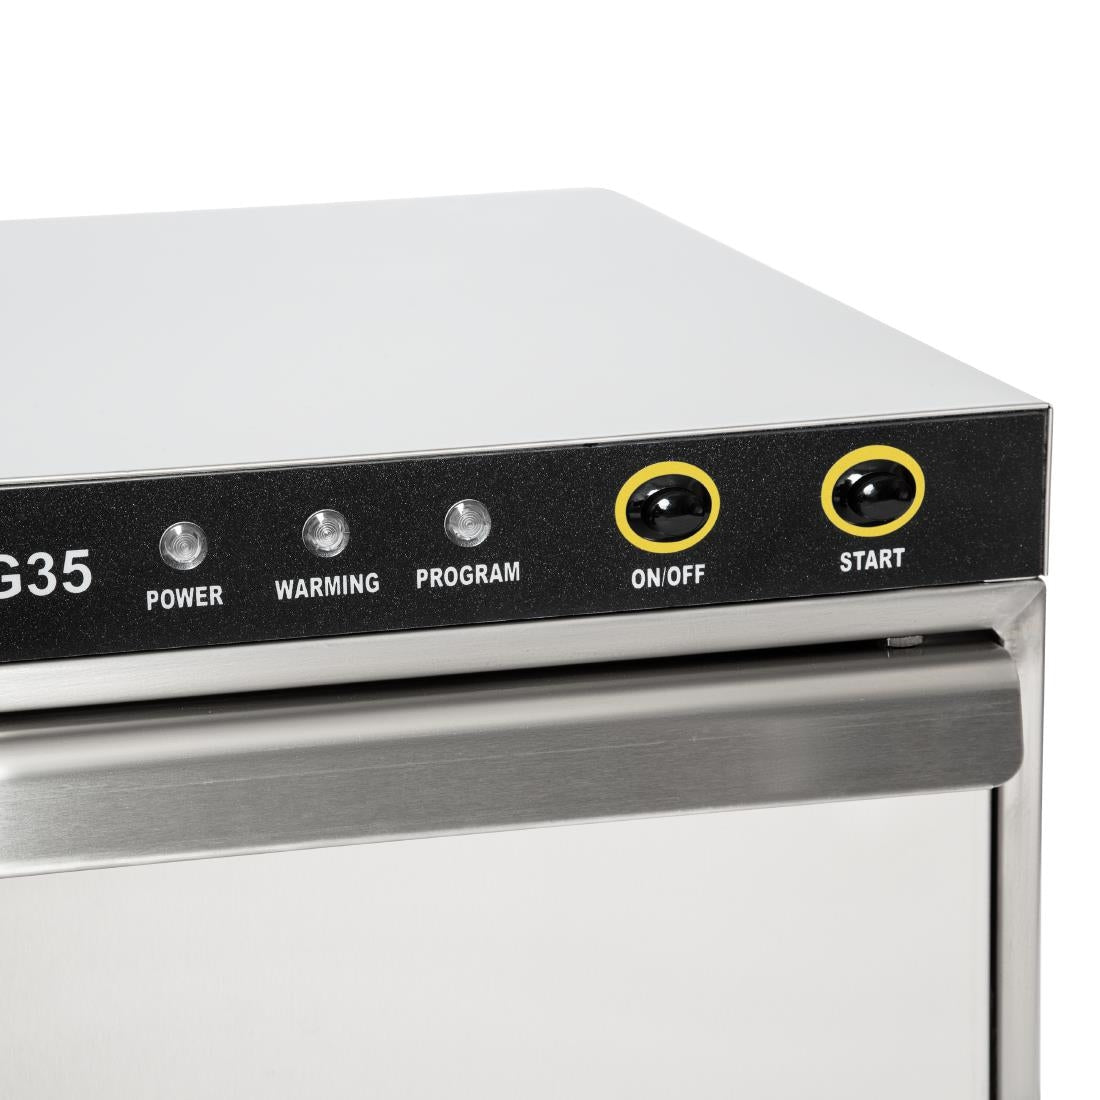 Buffalo Compact Glasswasher DW464 JD Catering Equipment Solutions Ltd